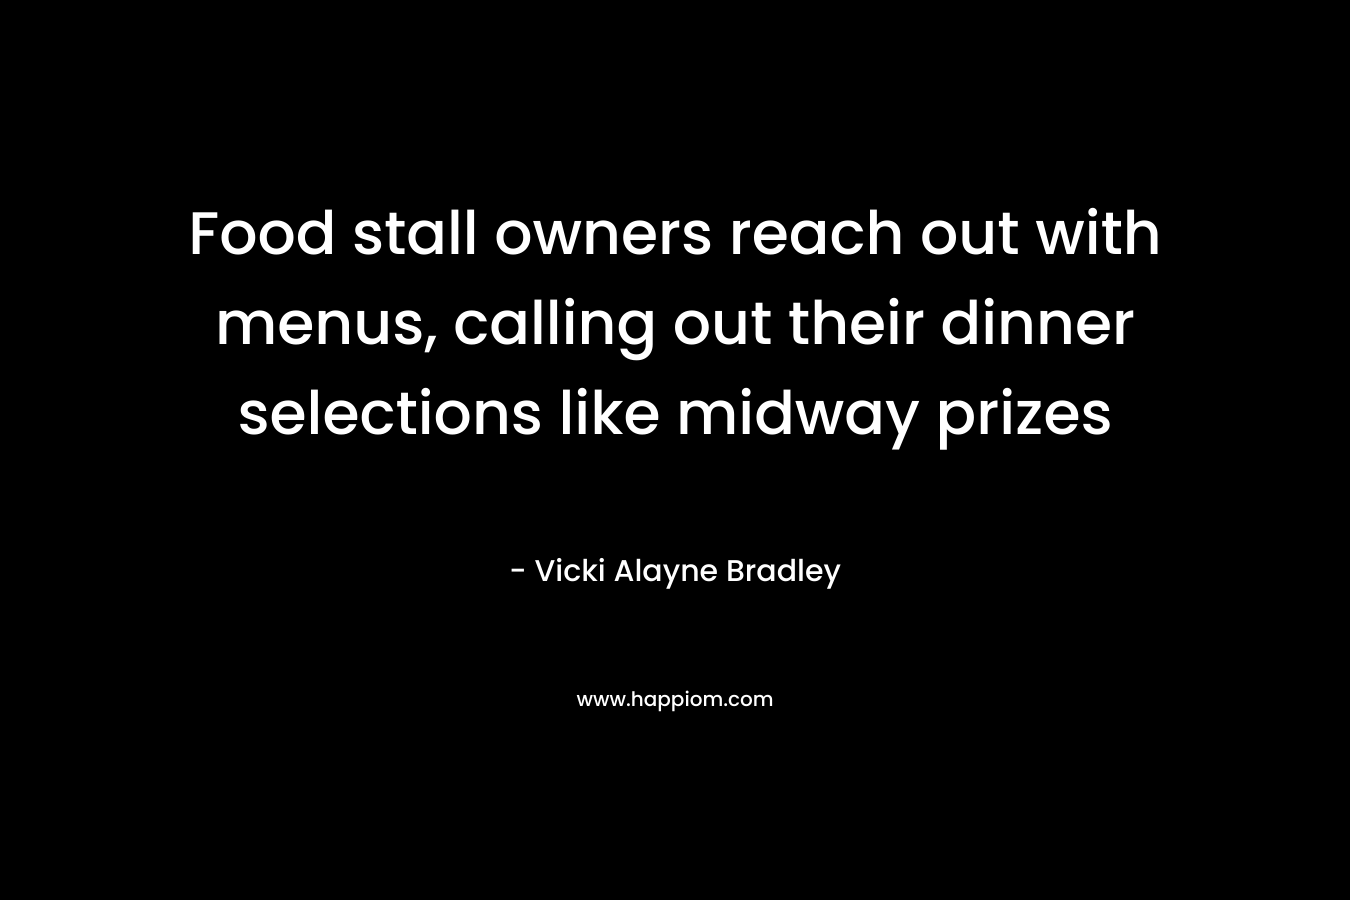 Food stall owners reach out with menus, calling out their dinner selections like midway prizes